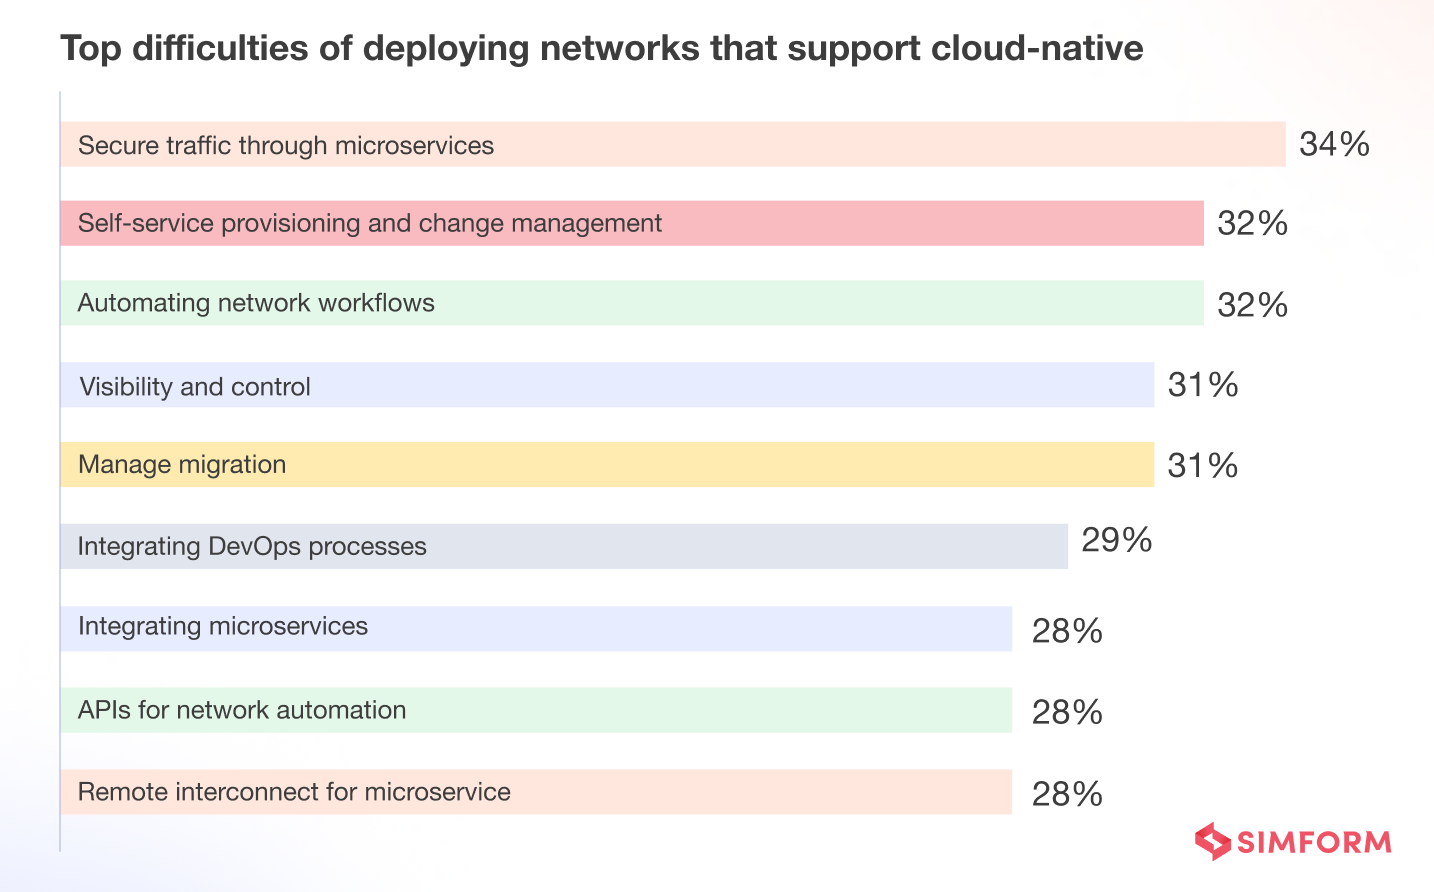 Top difficulties to deploy on cloud